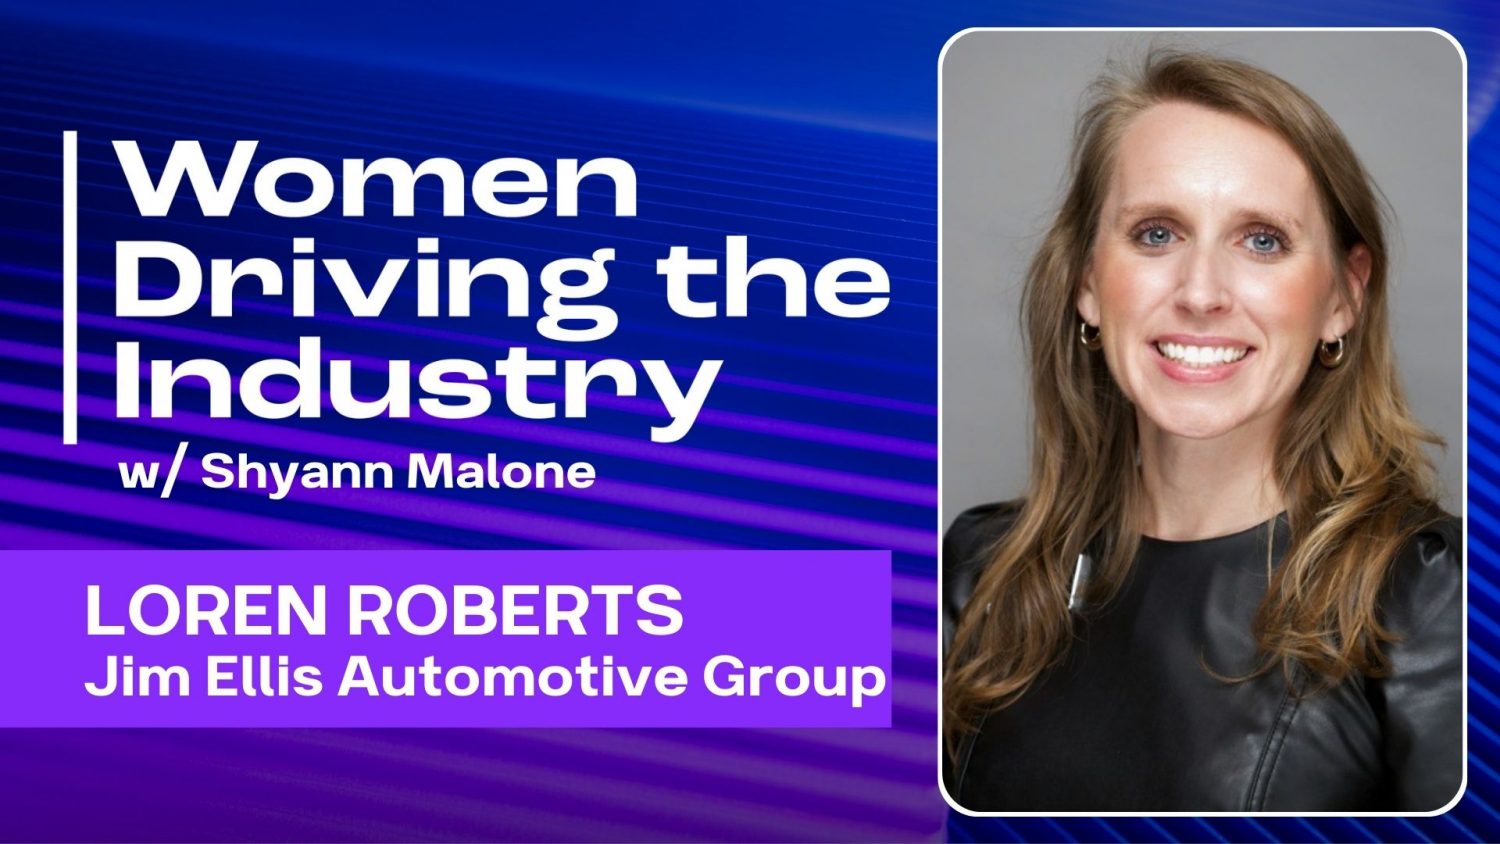 On today's episode of Women Driving the Industry, we focus on Loren Roberts, the Director of Marketing for Jim Ellis Automotive Group